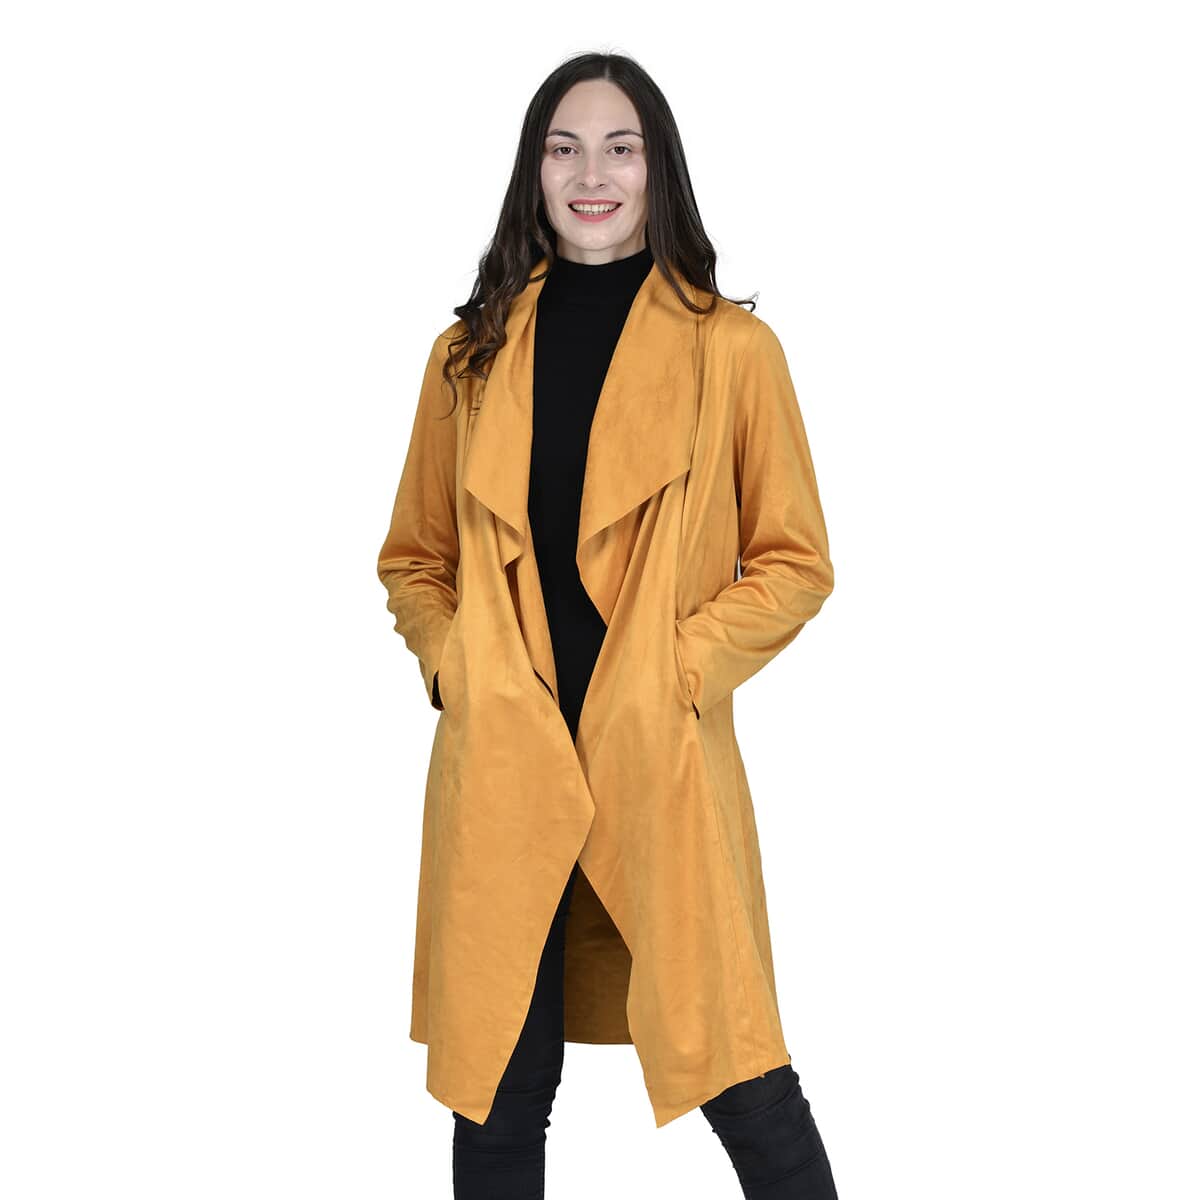 Passage Gold Faux Suede Long Waterfall Open Front Jacket For Ladies - XXL, Jacket for Women, Long Coat Jacket for Women, Womens Coats image number 0